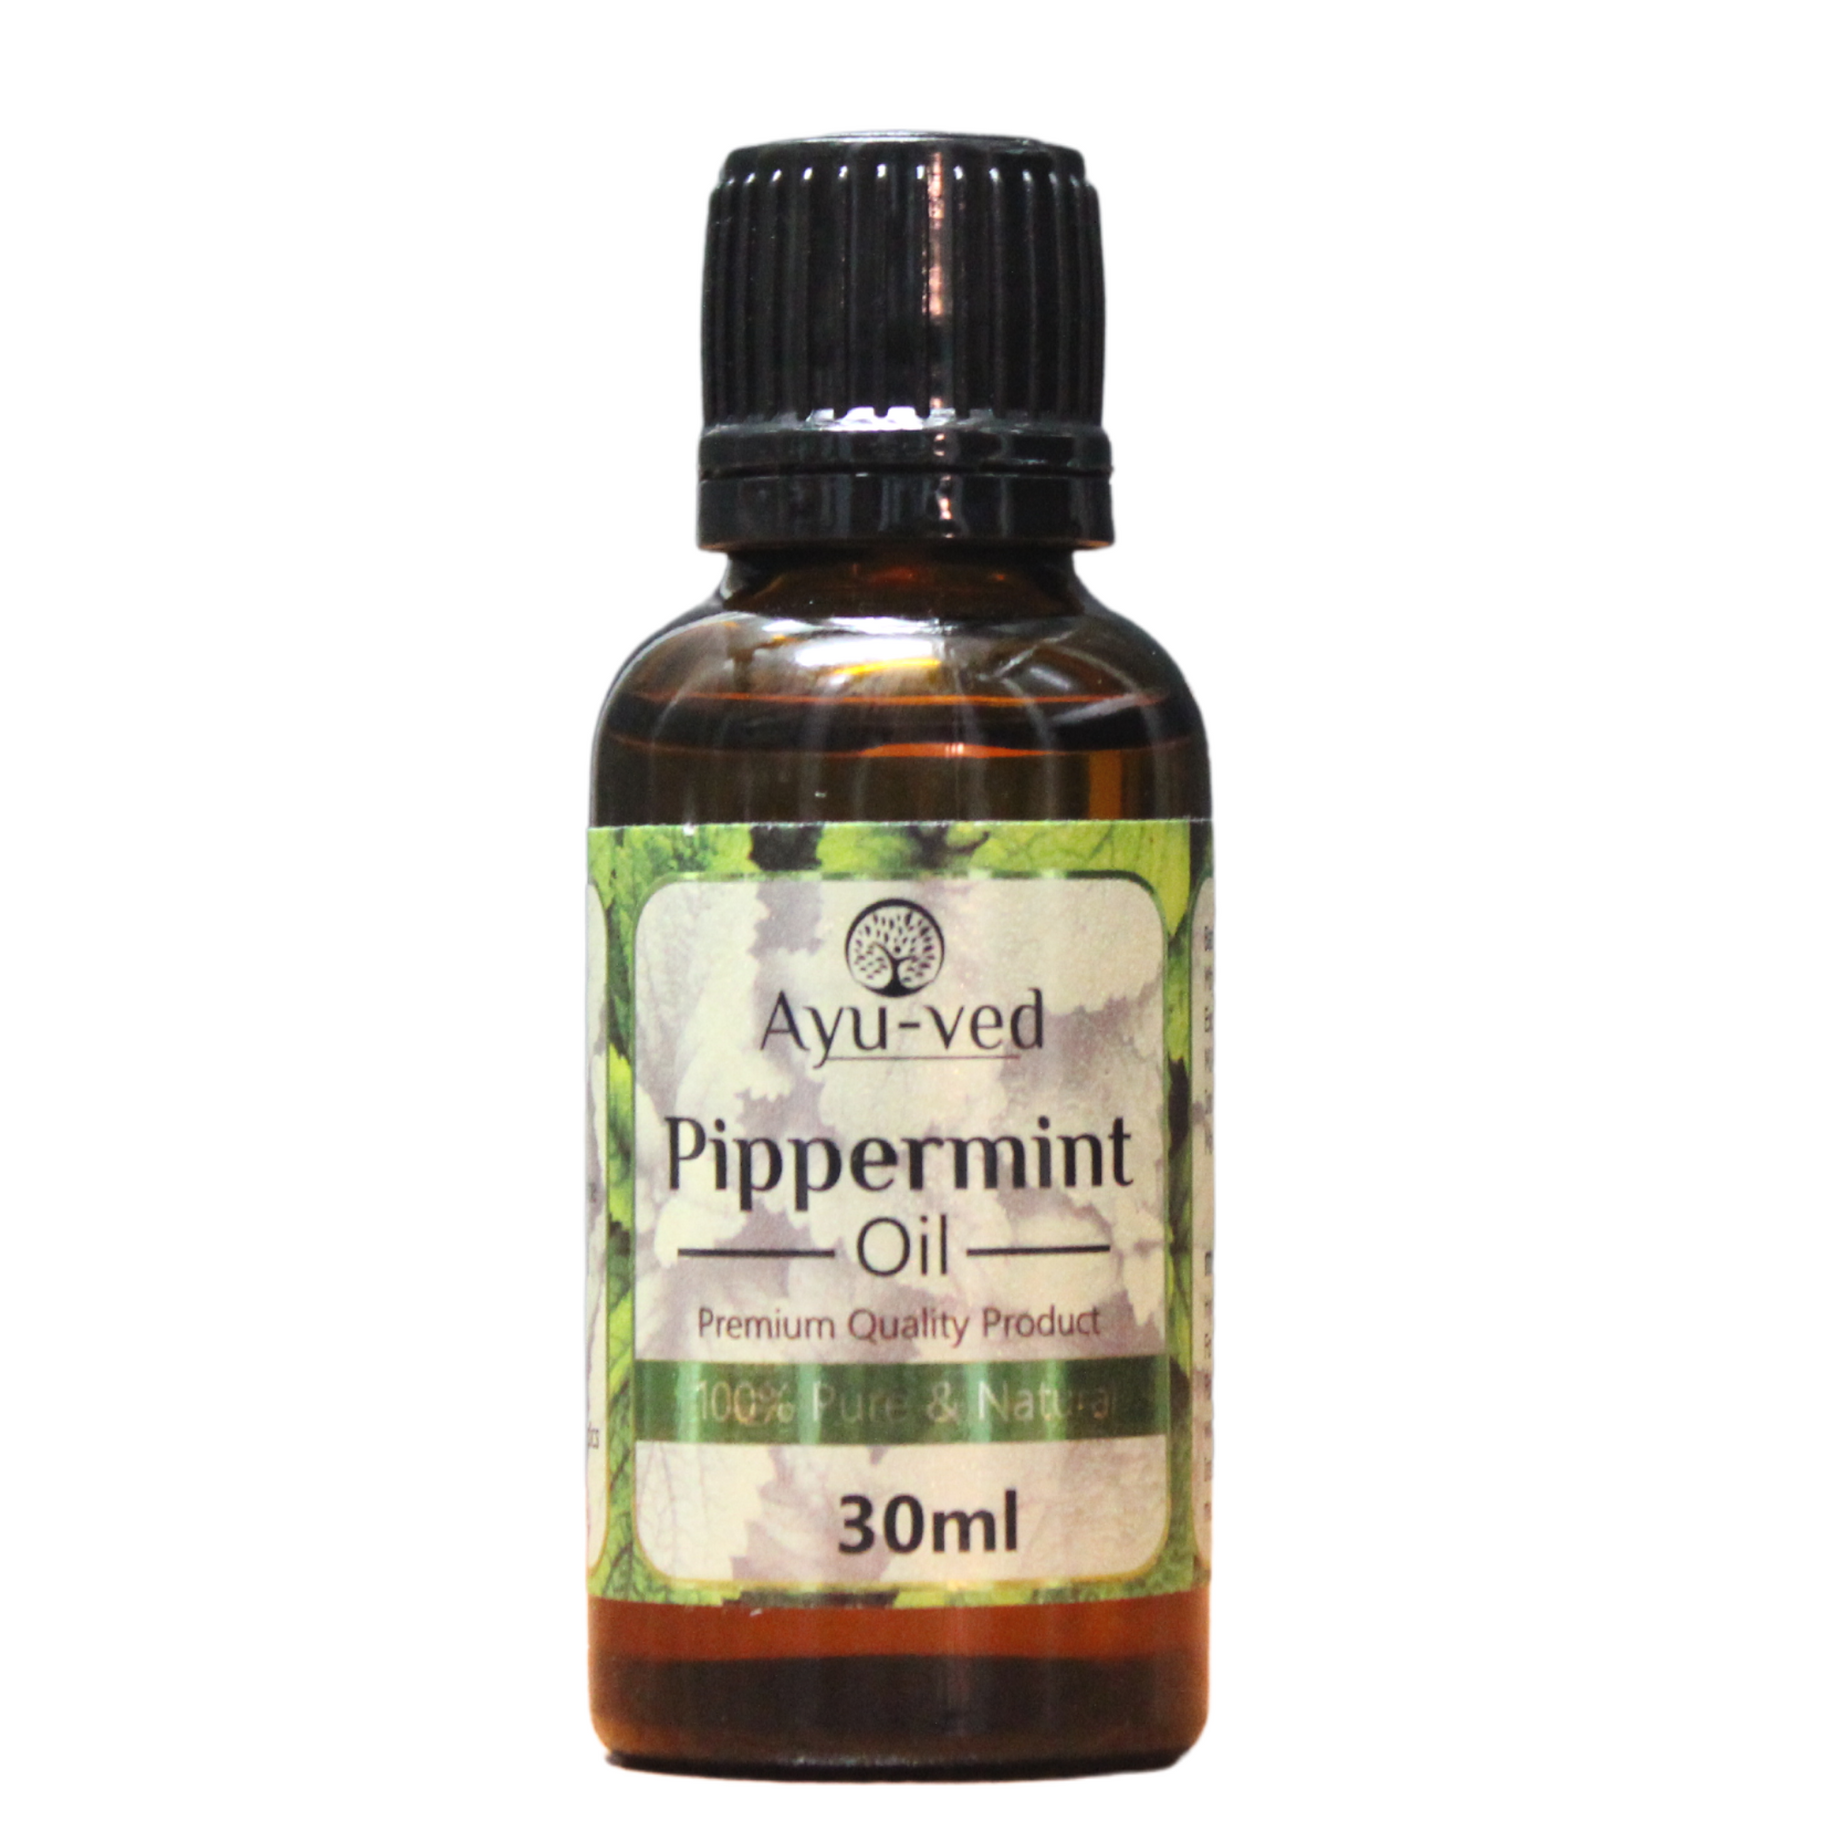 Shop Ayurved Pippermint Oil 30ml at price 198.00 from Ayuved Online - Ayush Care